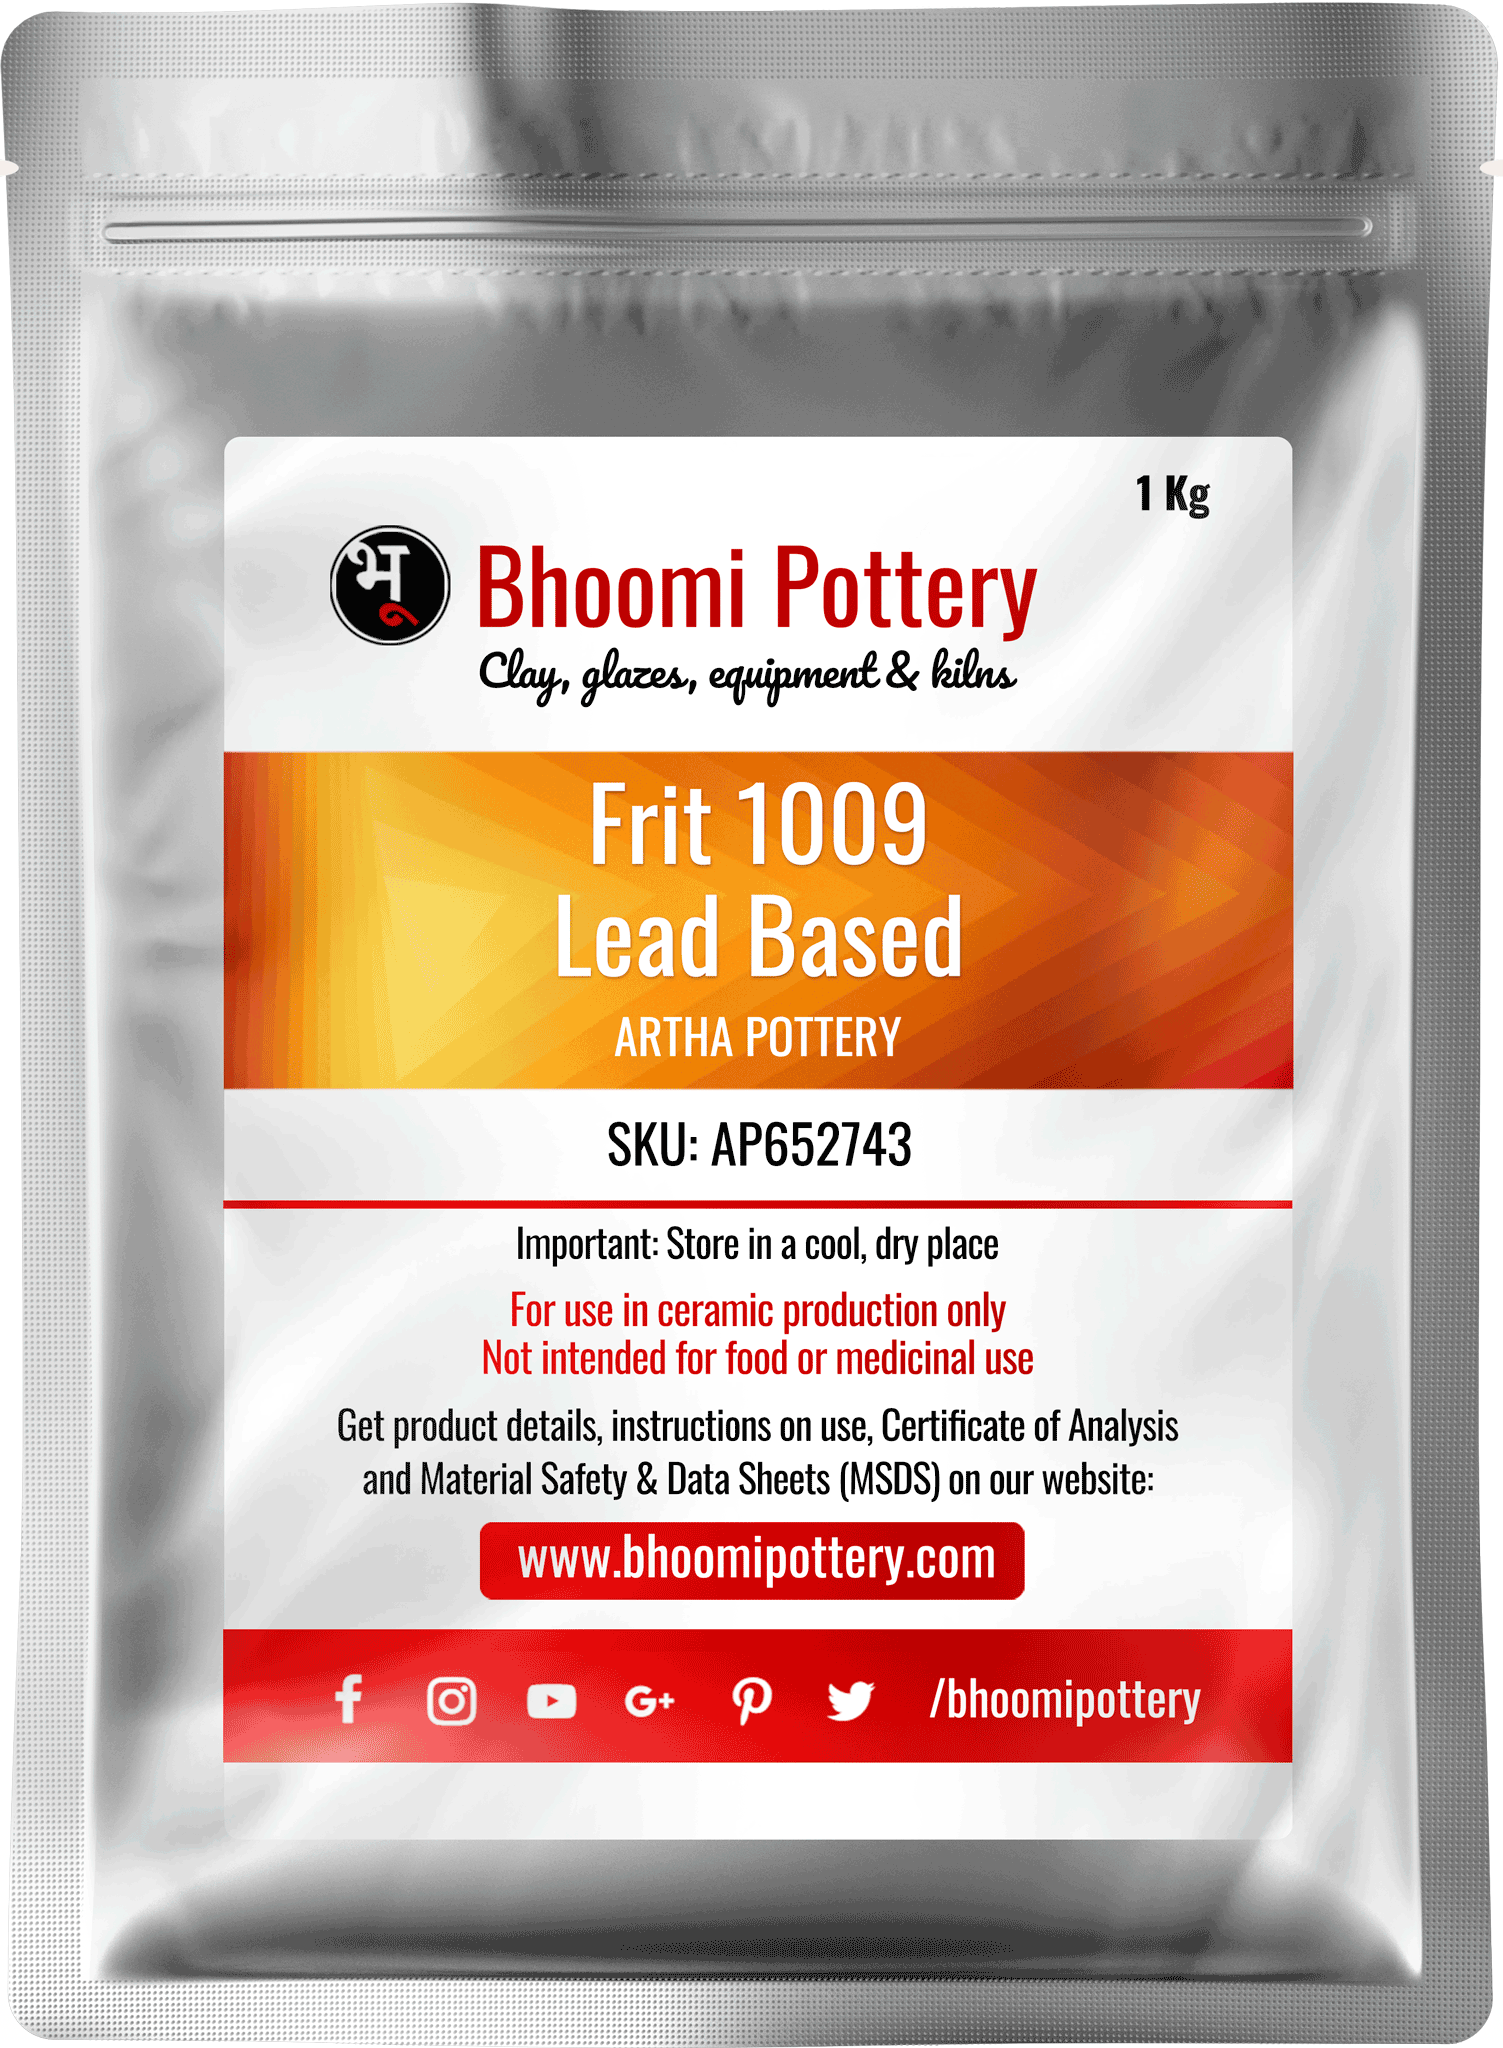 Artha Pottery Frit 1009 Lead Based 1 Kg for sale in India - Bhoomi Pottery